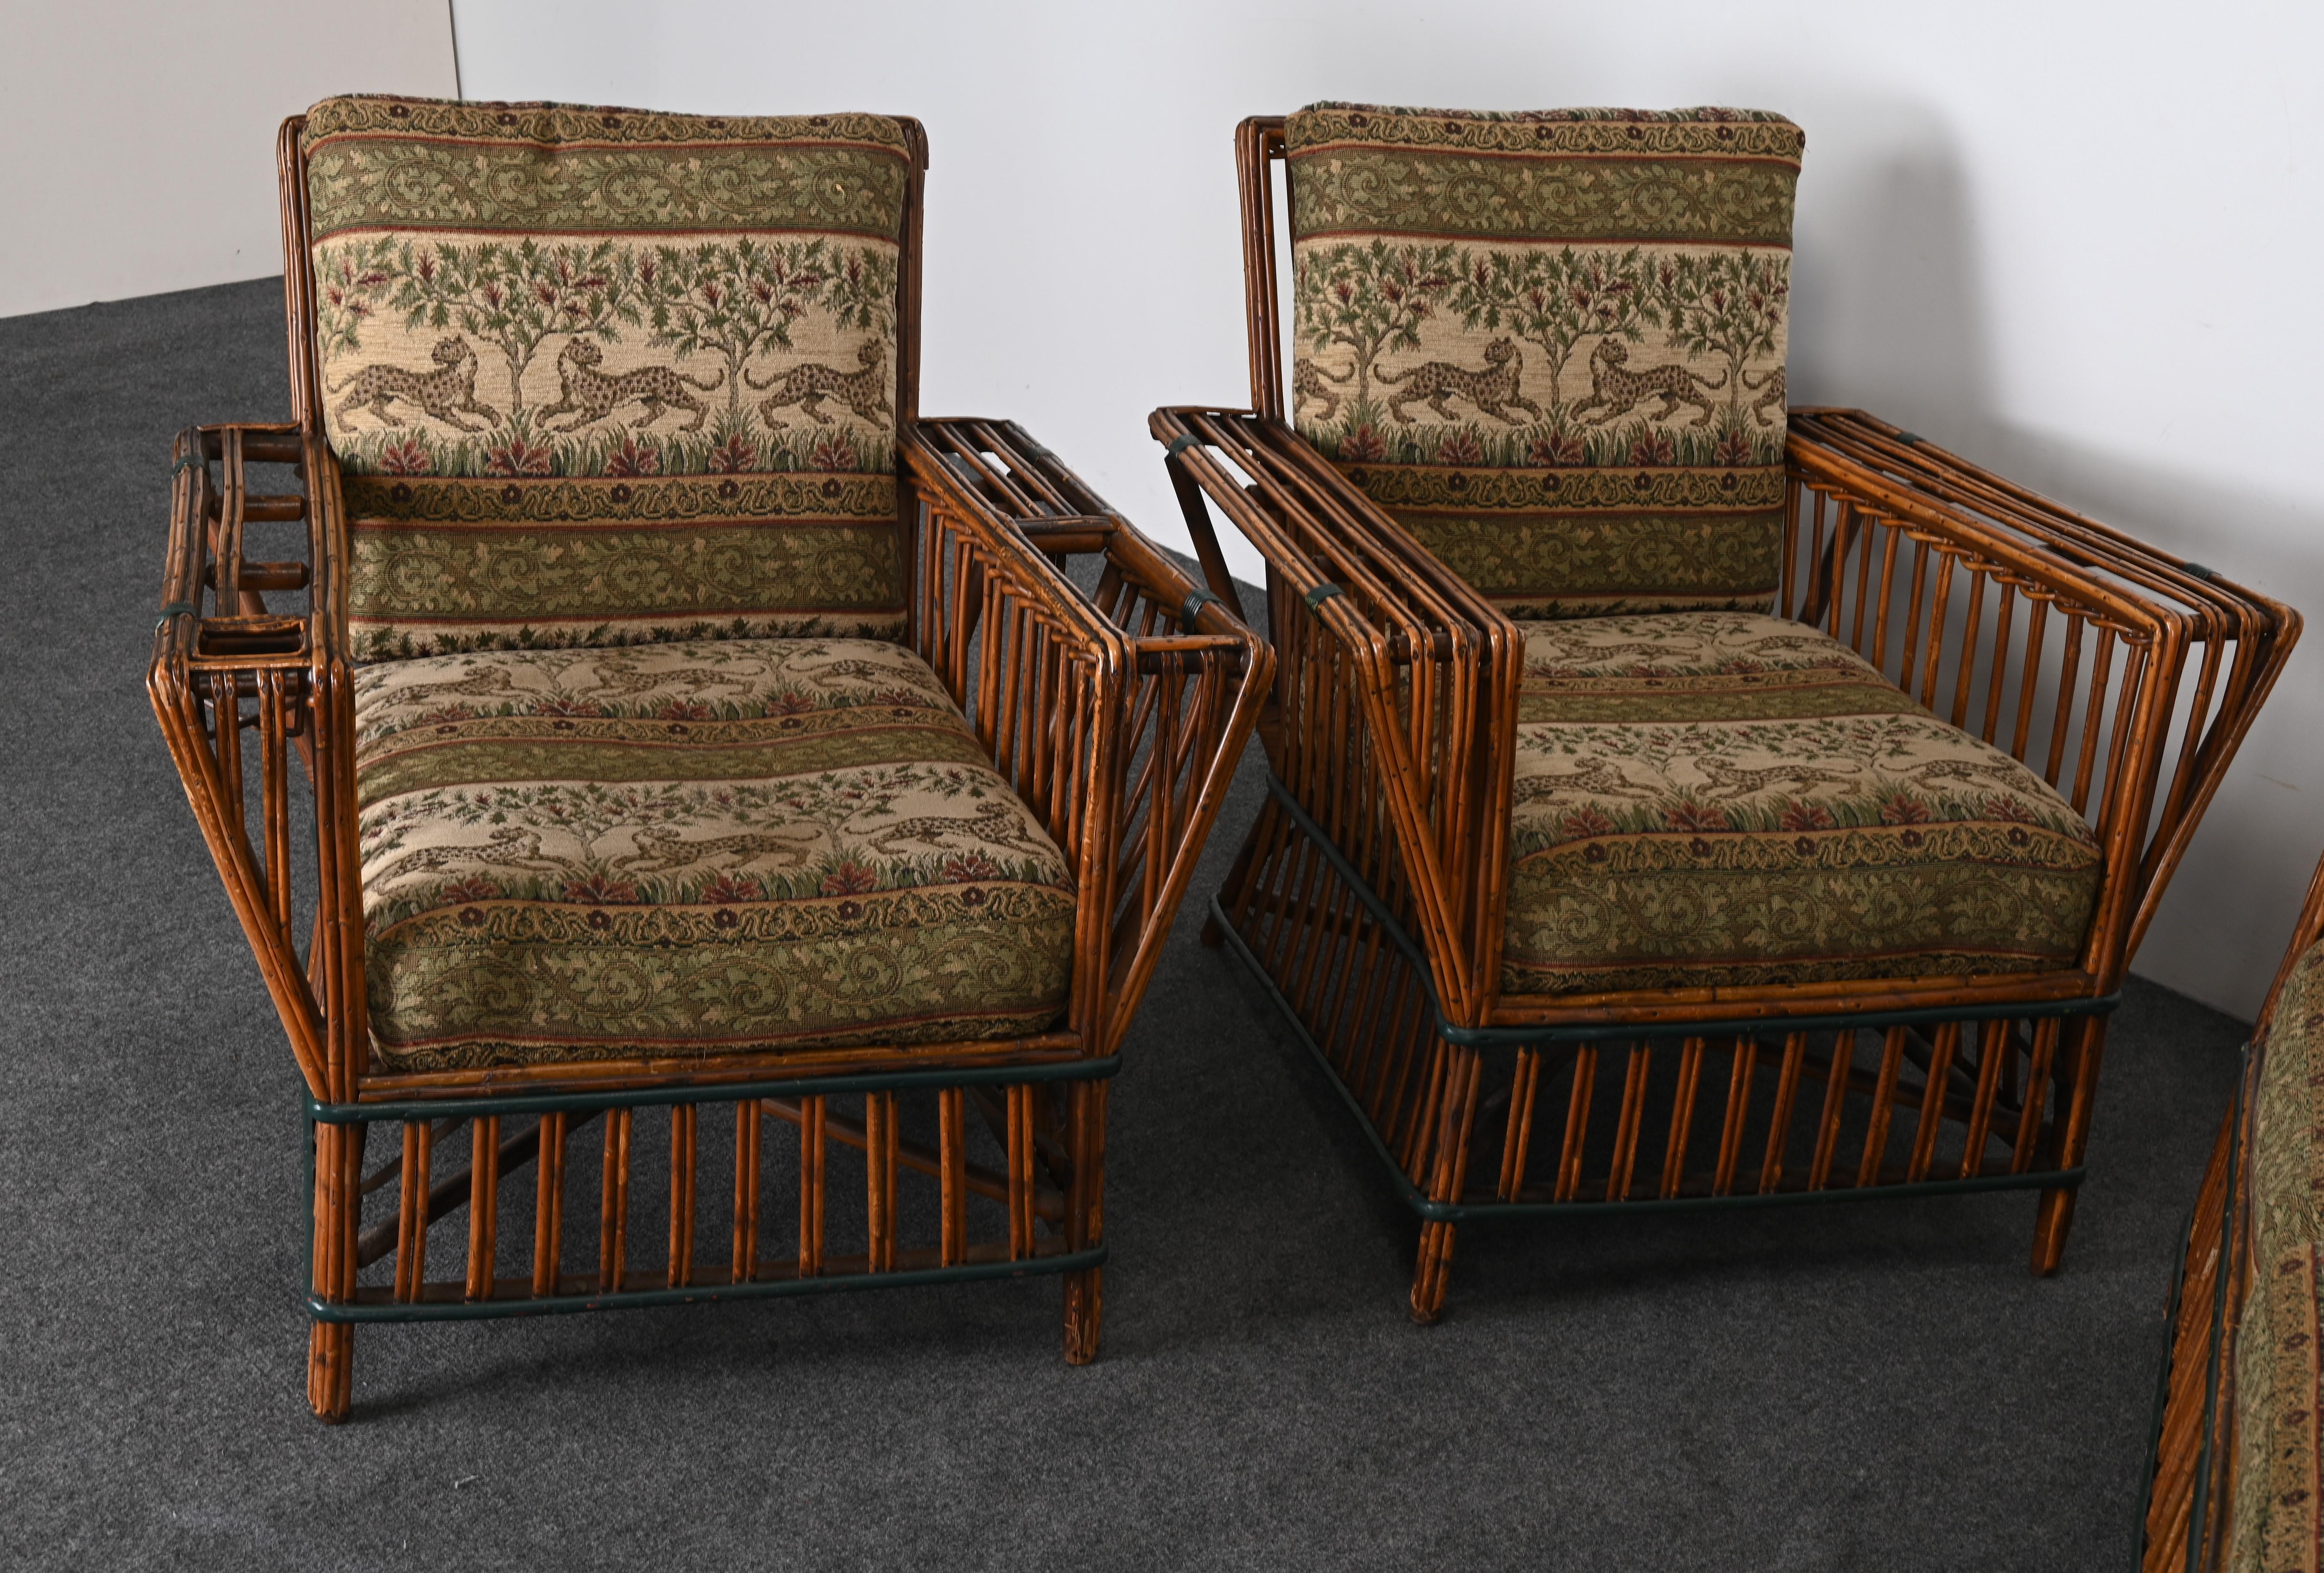 A handsome Art Deco Split Reed Rattan Sofa with a Pair of Armchairs and original cushions with vintage leopard-decorated fabric. You may want to reupholster. Some people call this Split Reed Ypsilanti Stick Wicker. The set is a wonderful ensemble